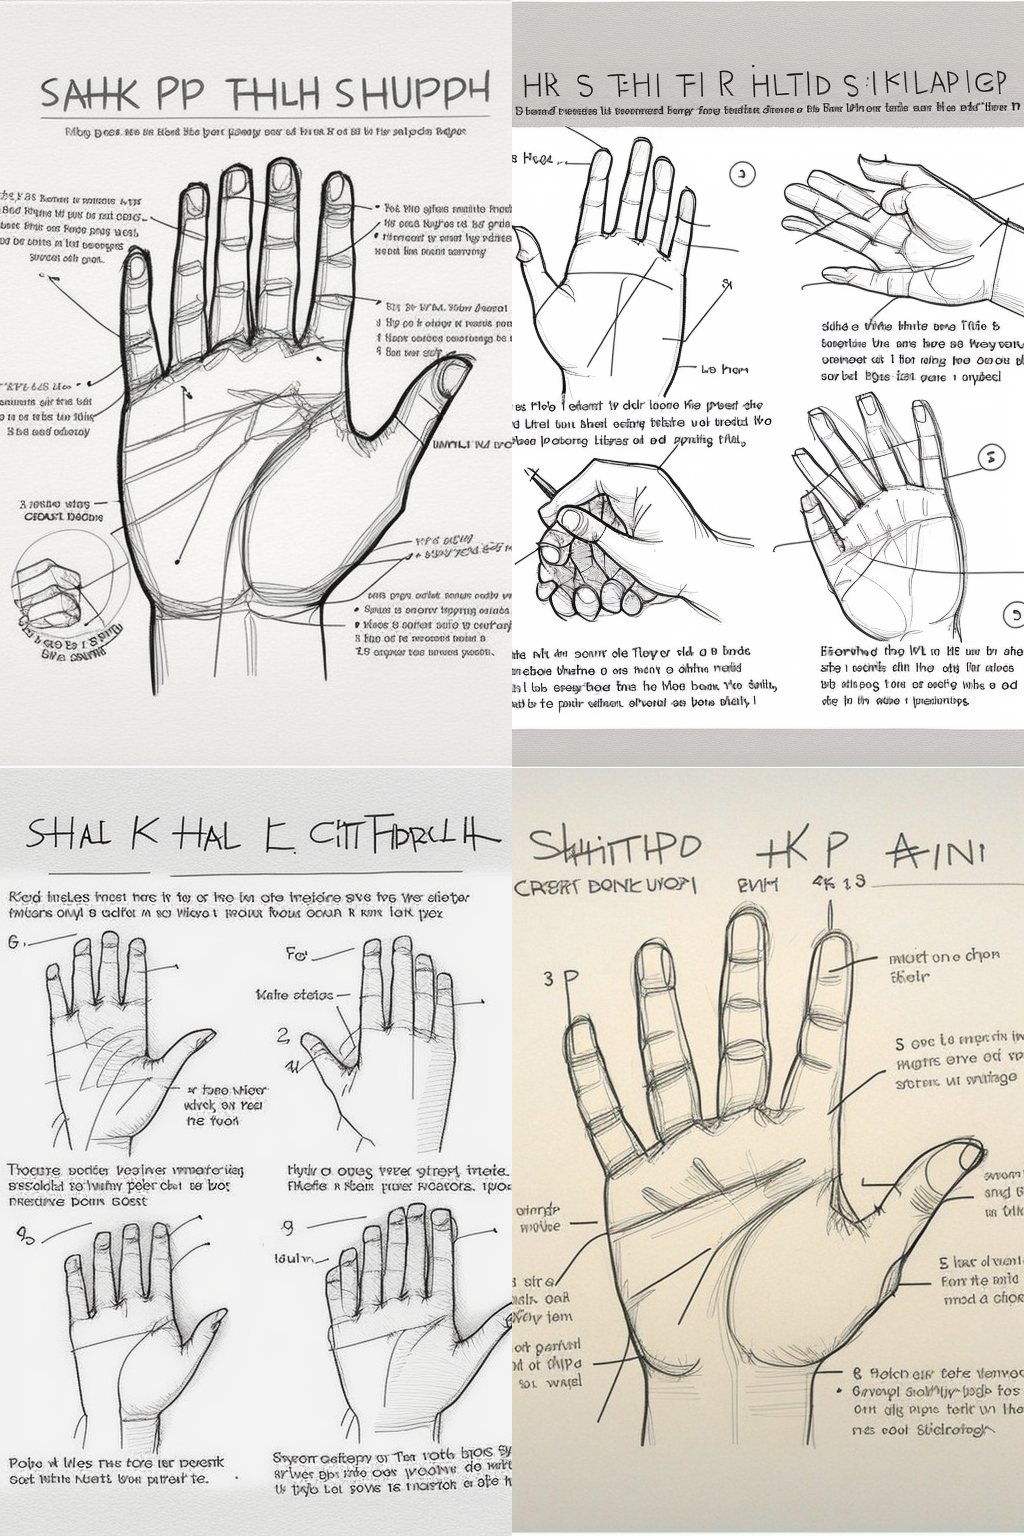 Four sketches surrounded by nonsense text as if from an art textbook about how to draw hands, but one has six fingers rather than the usual five, one has seven, and one has nine. Another hand is shown with thumbs on both sides. A few hands are drawn to suggest that the fingernails are on the palm-side of the hand. One hand has a too-large thumbnail that itself has another, smaller thumbnail.